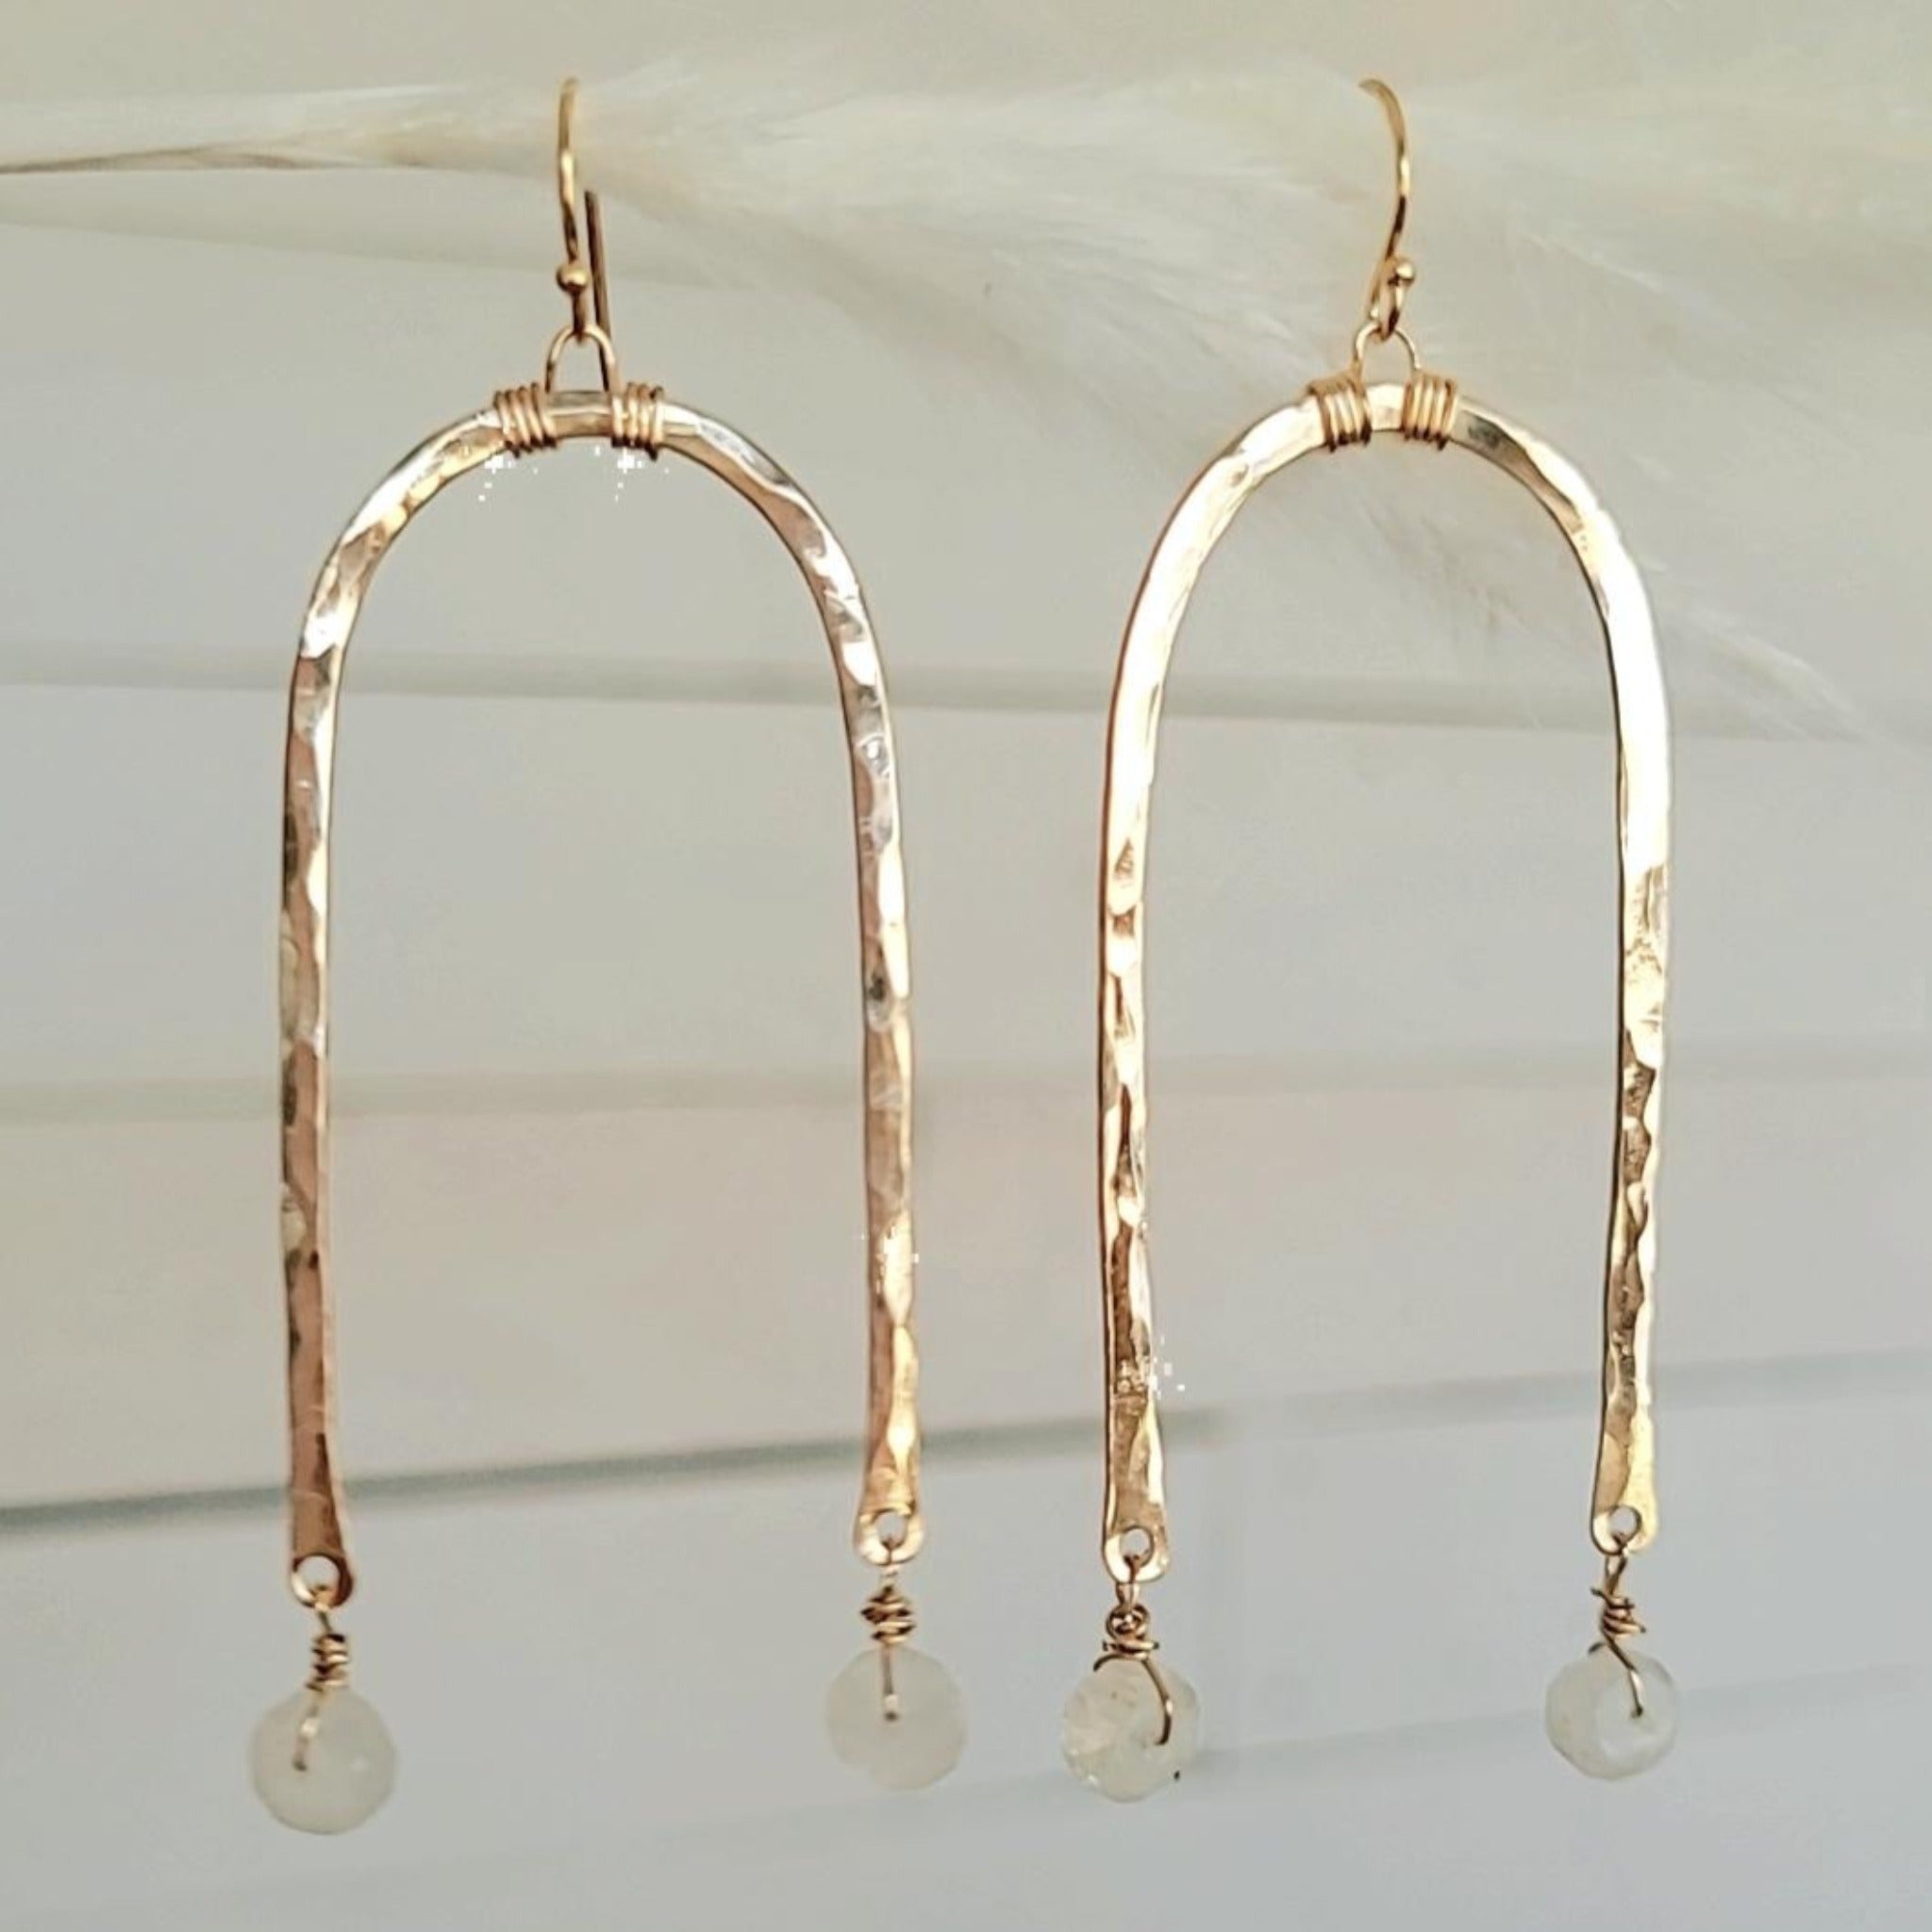 Rainbow and Stone Dangle Earrings - Large or Small - Sterling, Gold or Rose Gold